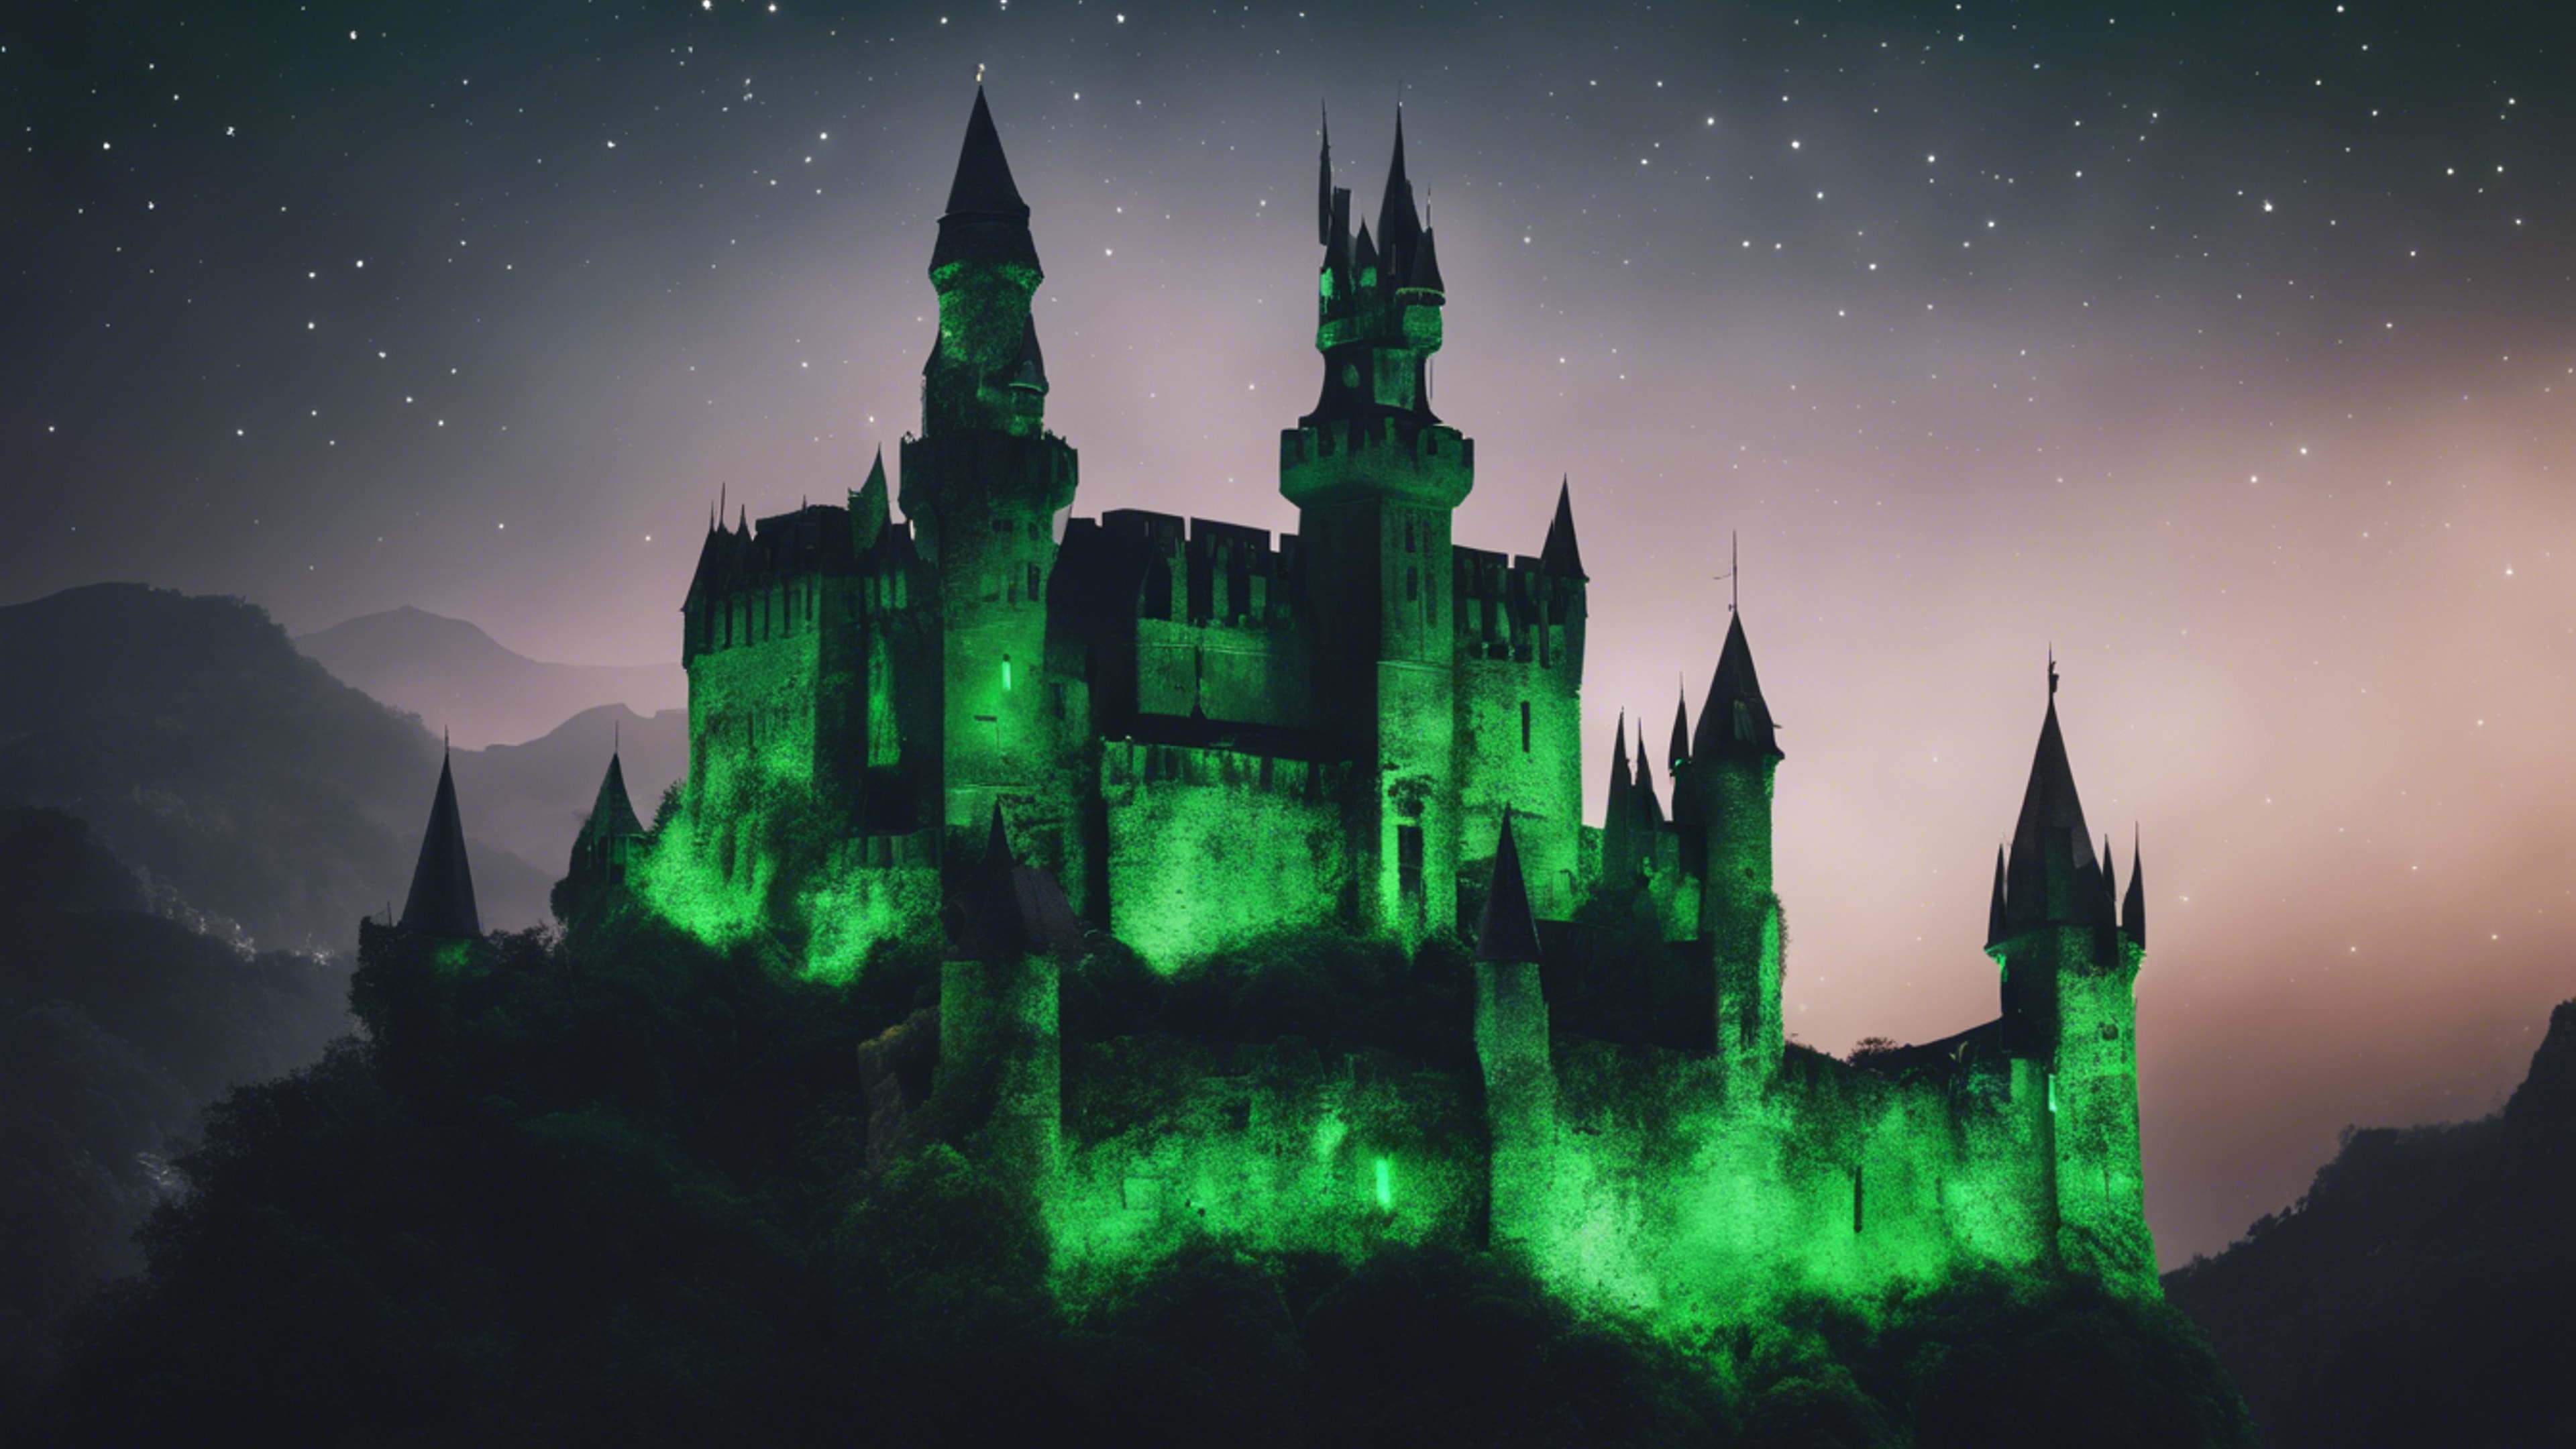 A night scene of a black castle lit with glowing green lights. Wallpaper[c20d7fb800a14bf396d1]